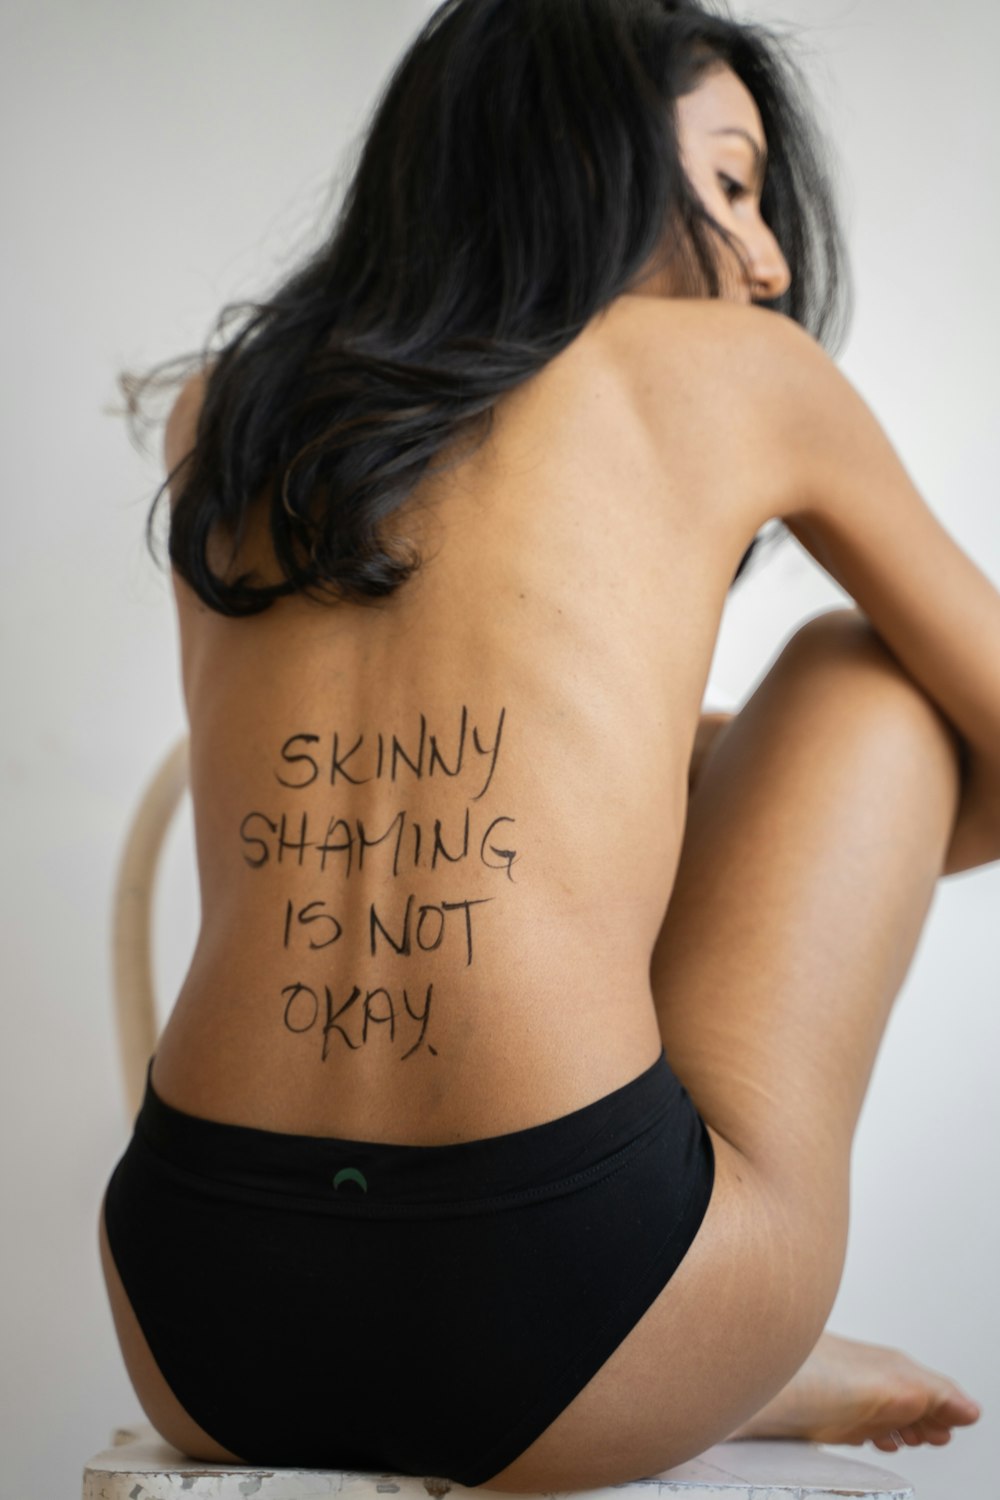 Body Shaming Pictures | Download Free Images on Unsplash